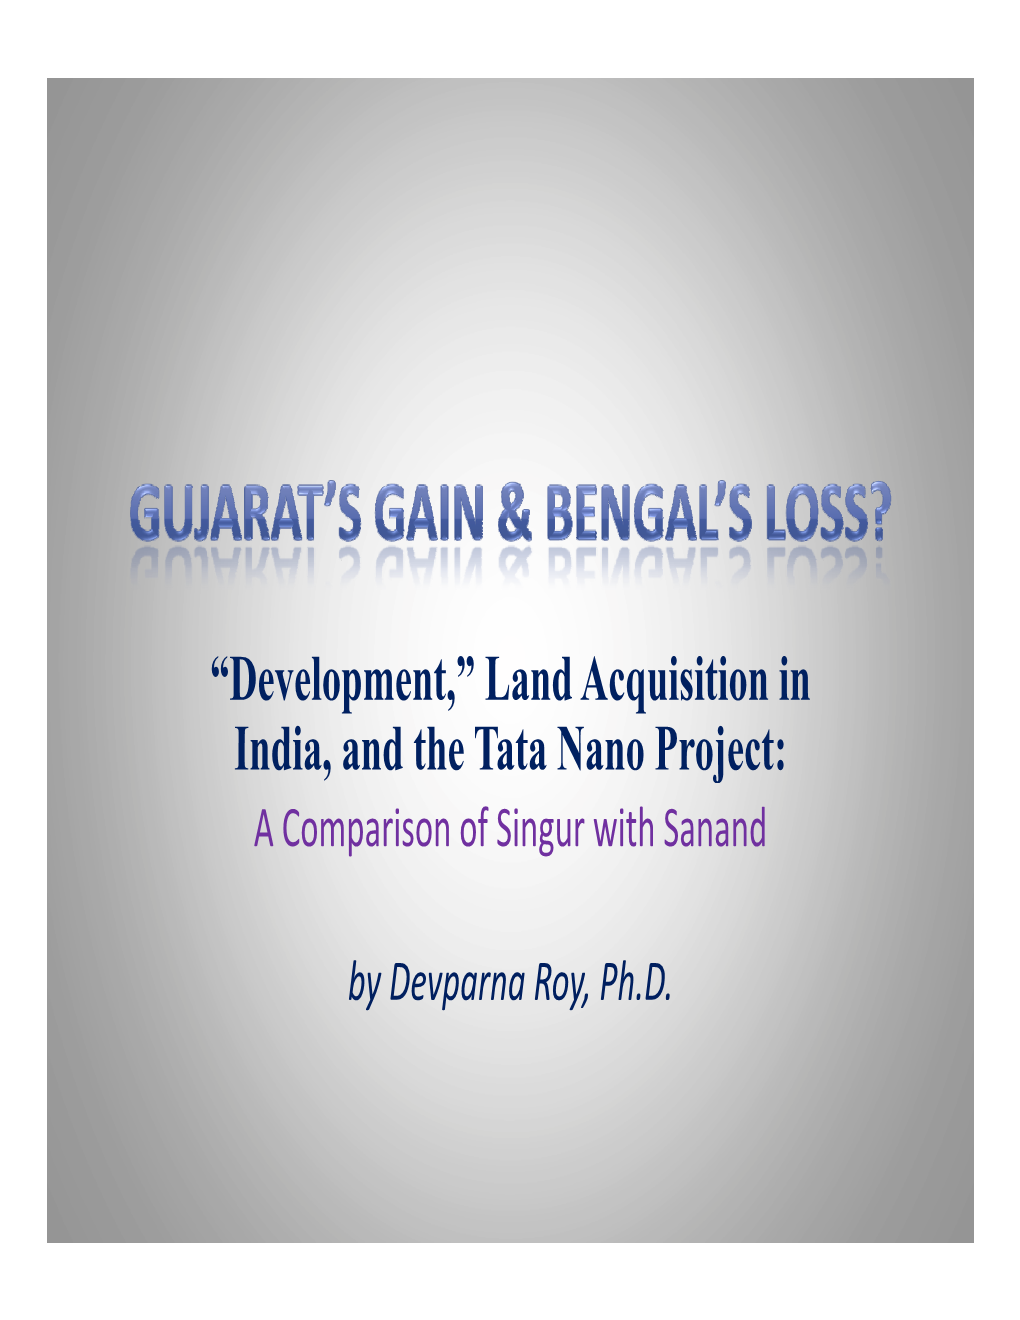 Land Acquisition in India and the Tata Nano Project